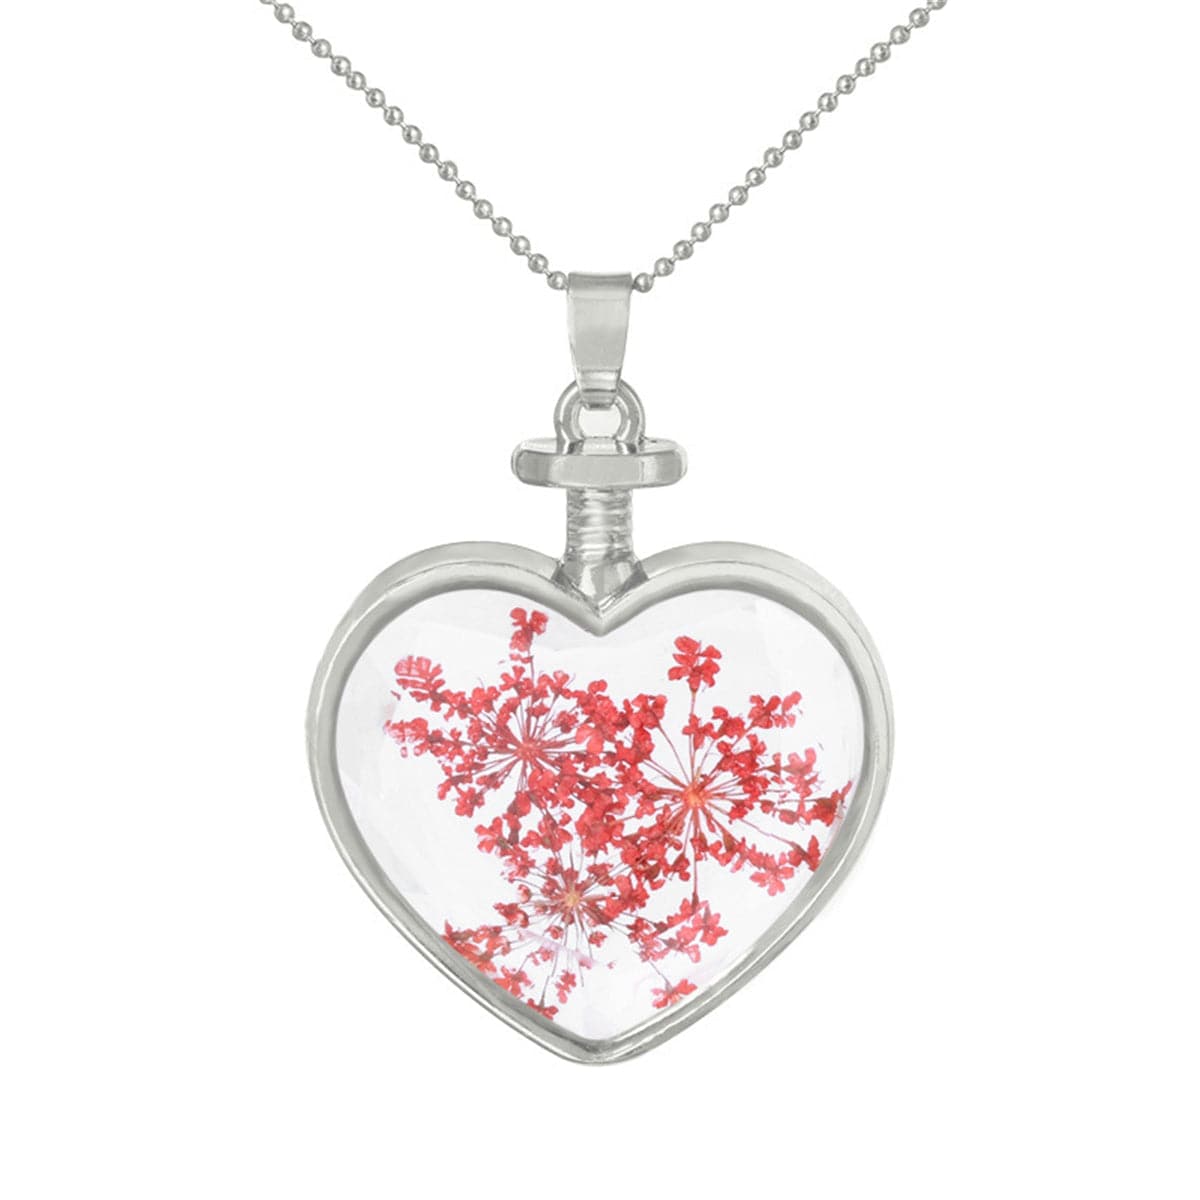 Red Pressed Gypsophila & Silver-Plated Heart Pendant Necklace